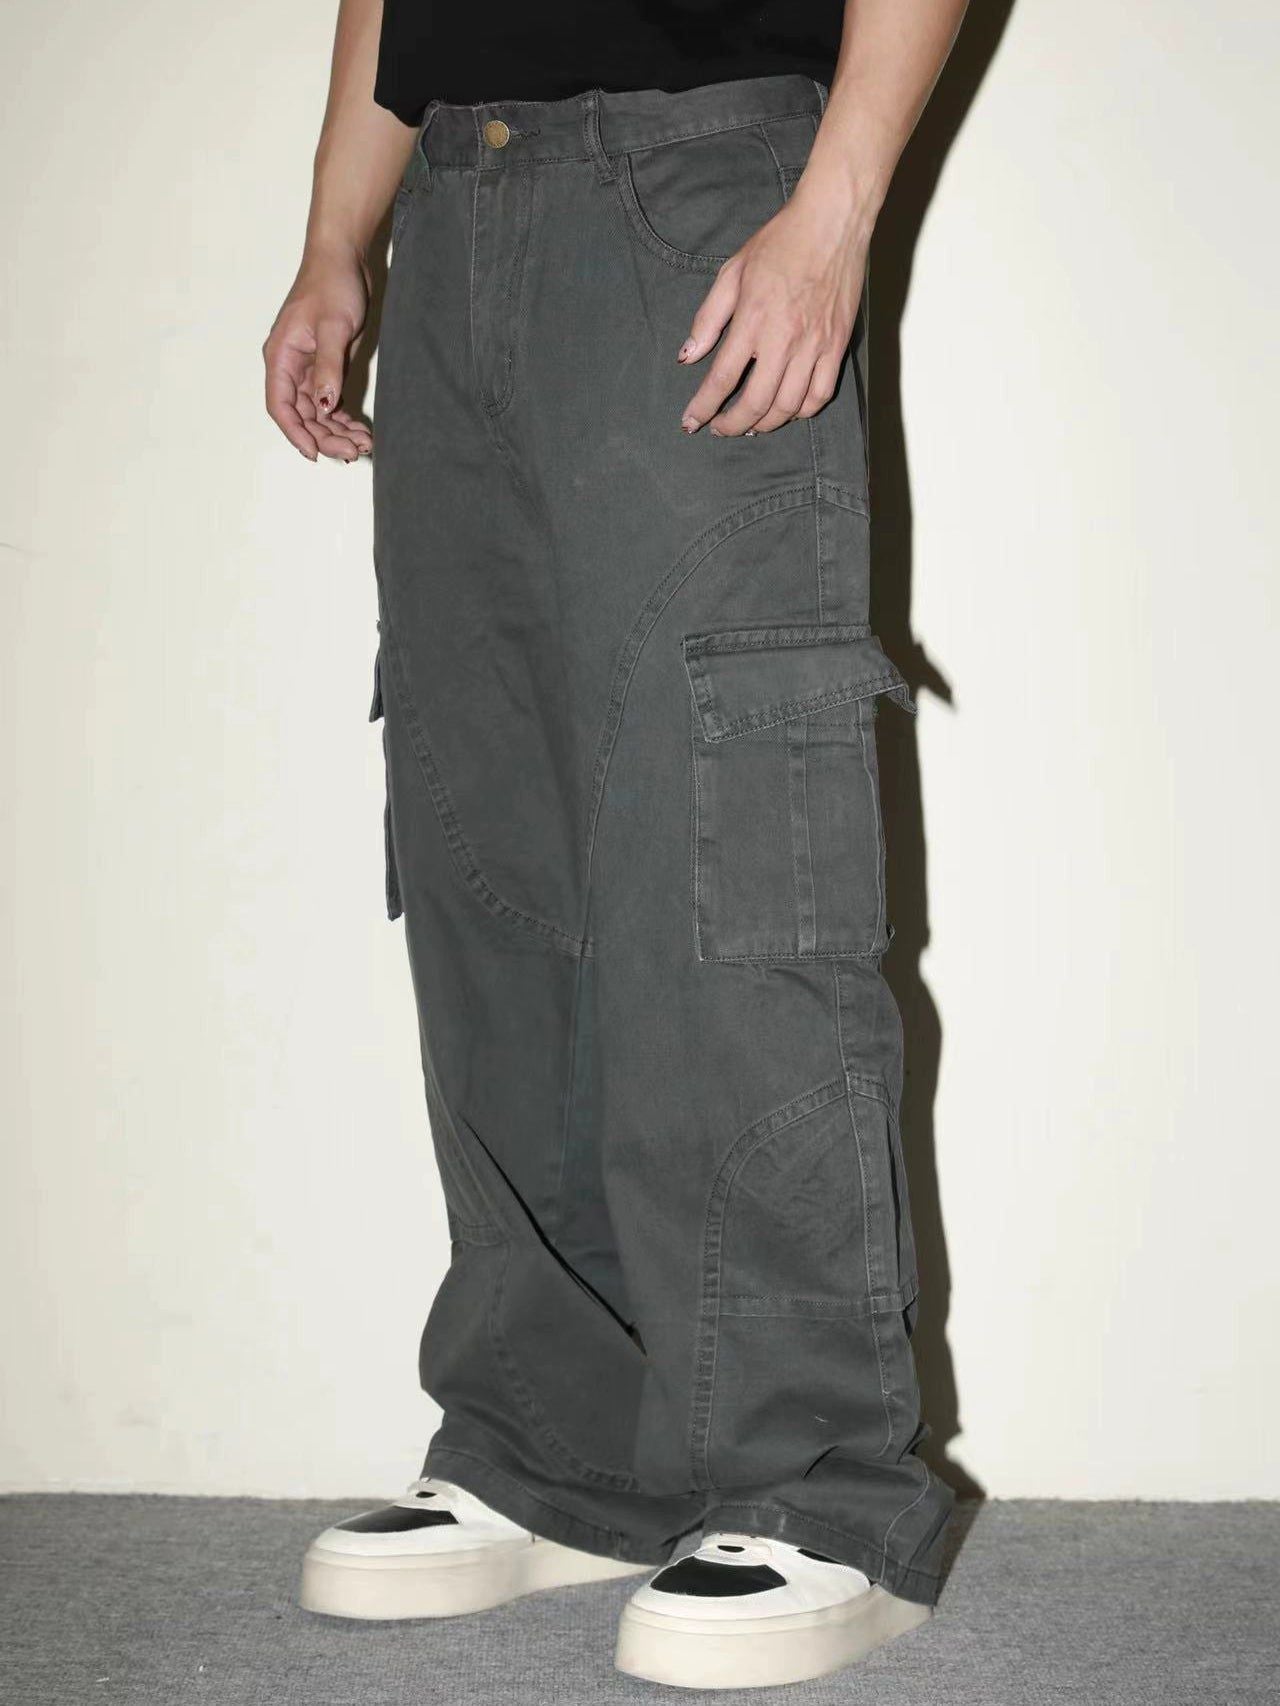 Faded Spliced Cargo Pants Korean Street Fashion Pants By Made Extreme Shop Online at OH Vault